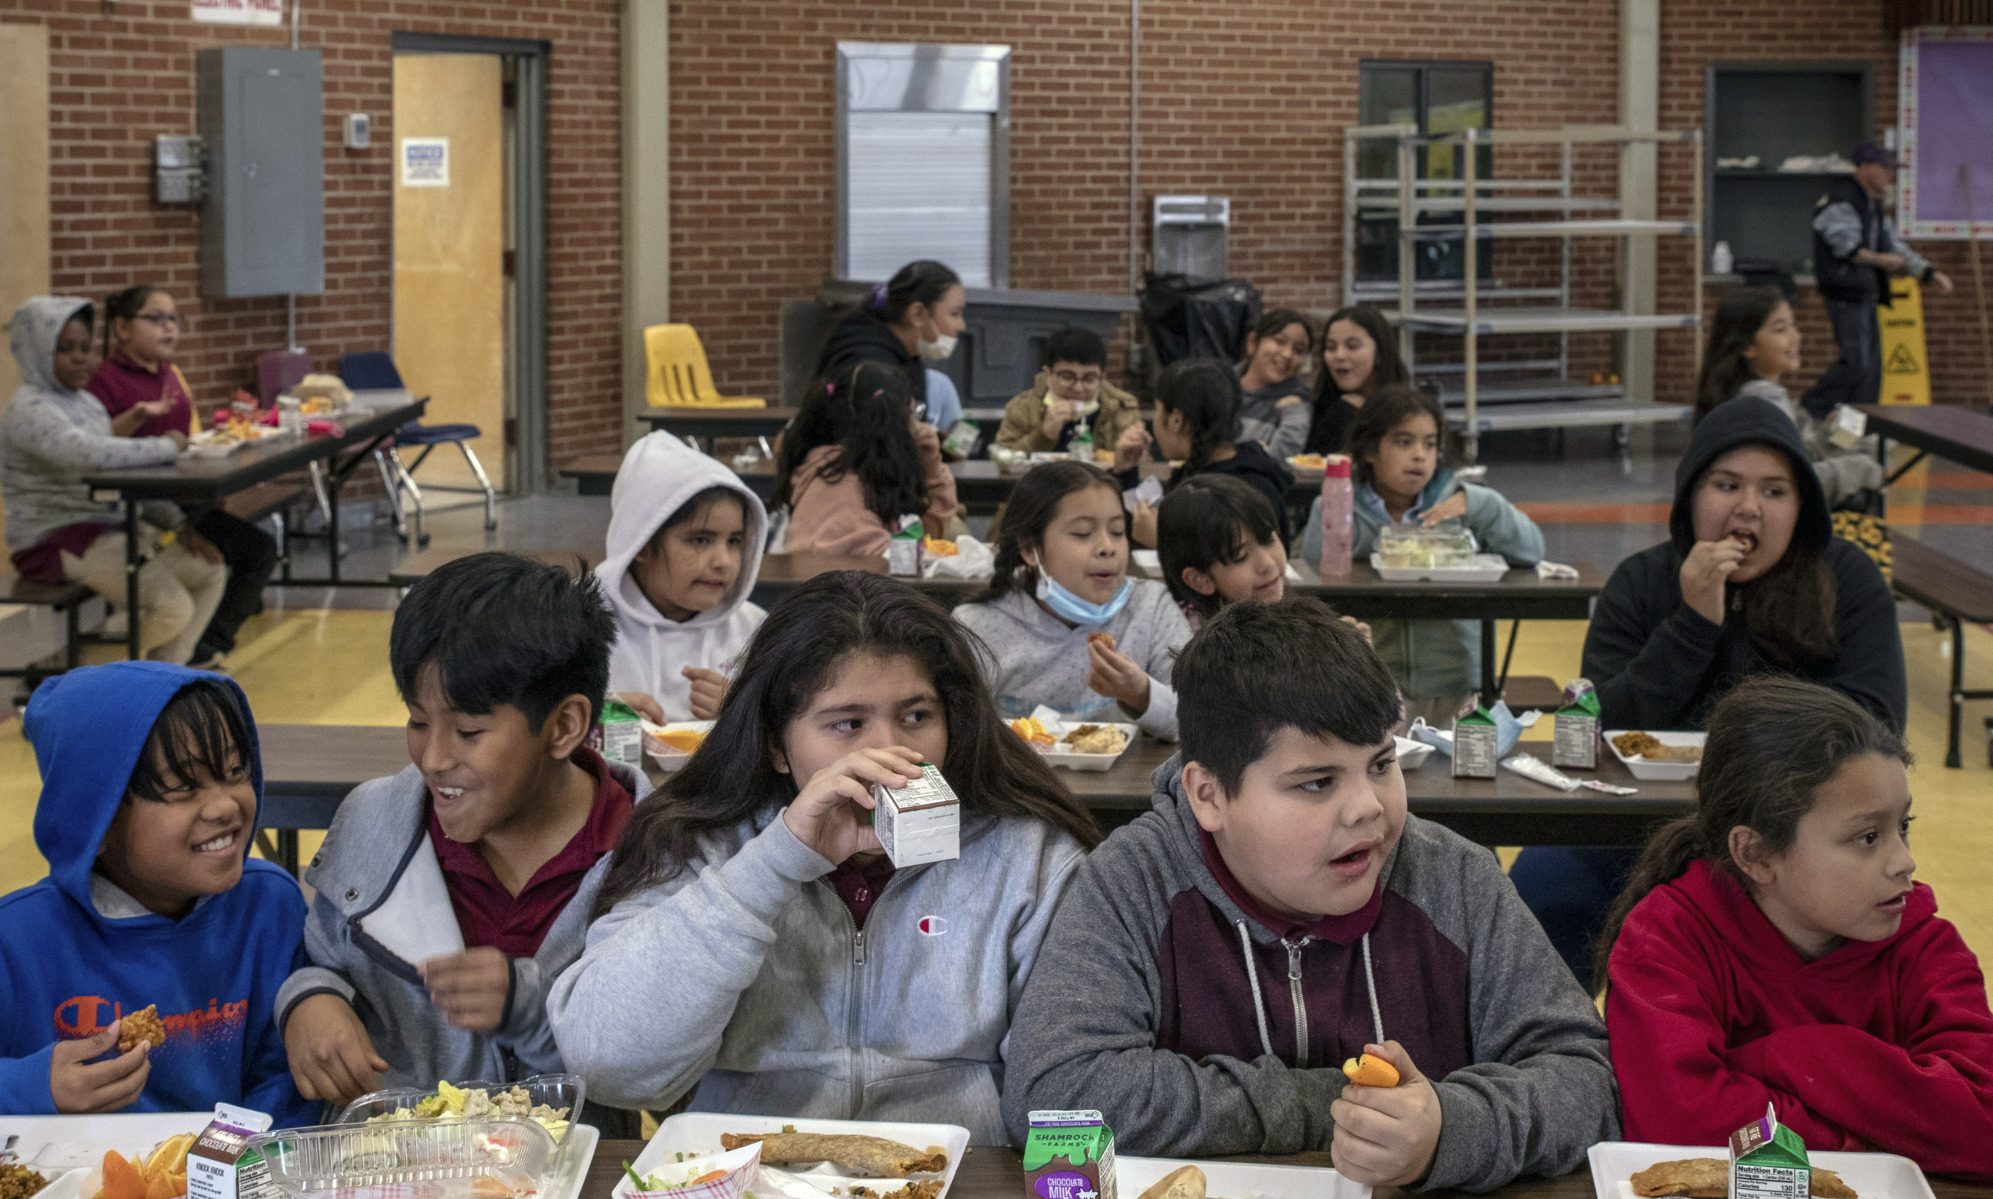 Hungry kids: Elementary school students sit at several lunch tables inside a school cafeteria with red brick walls.